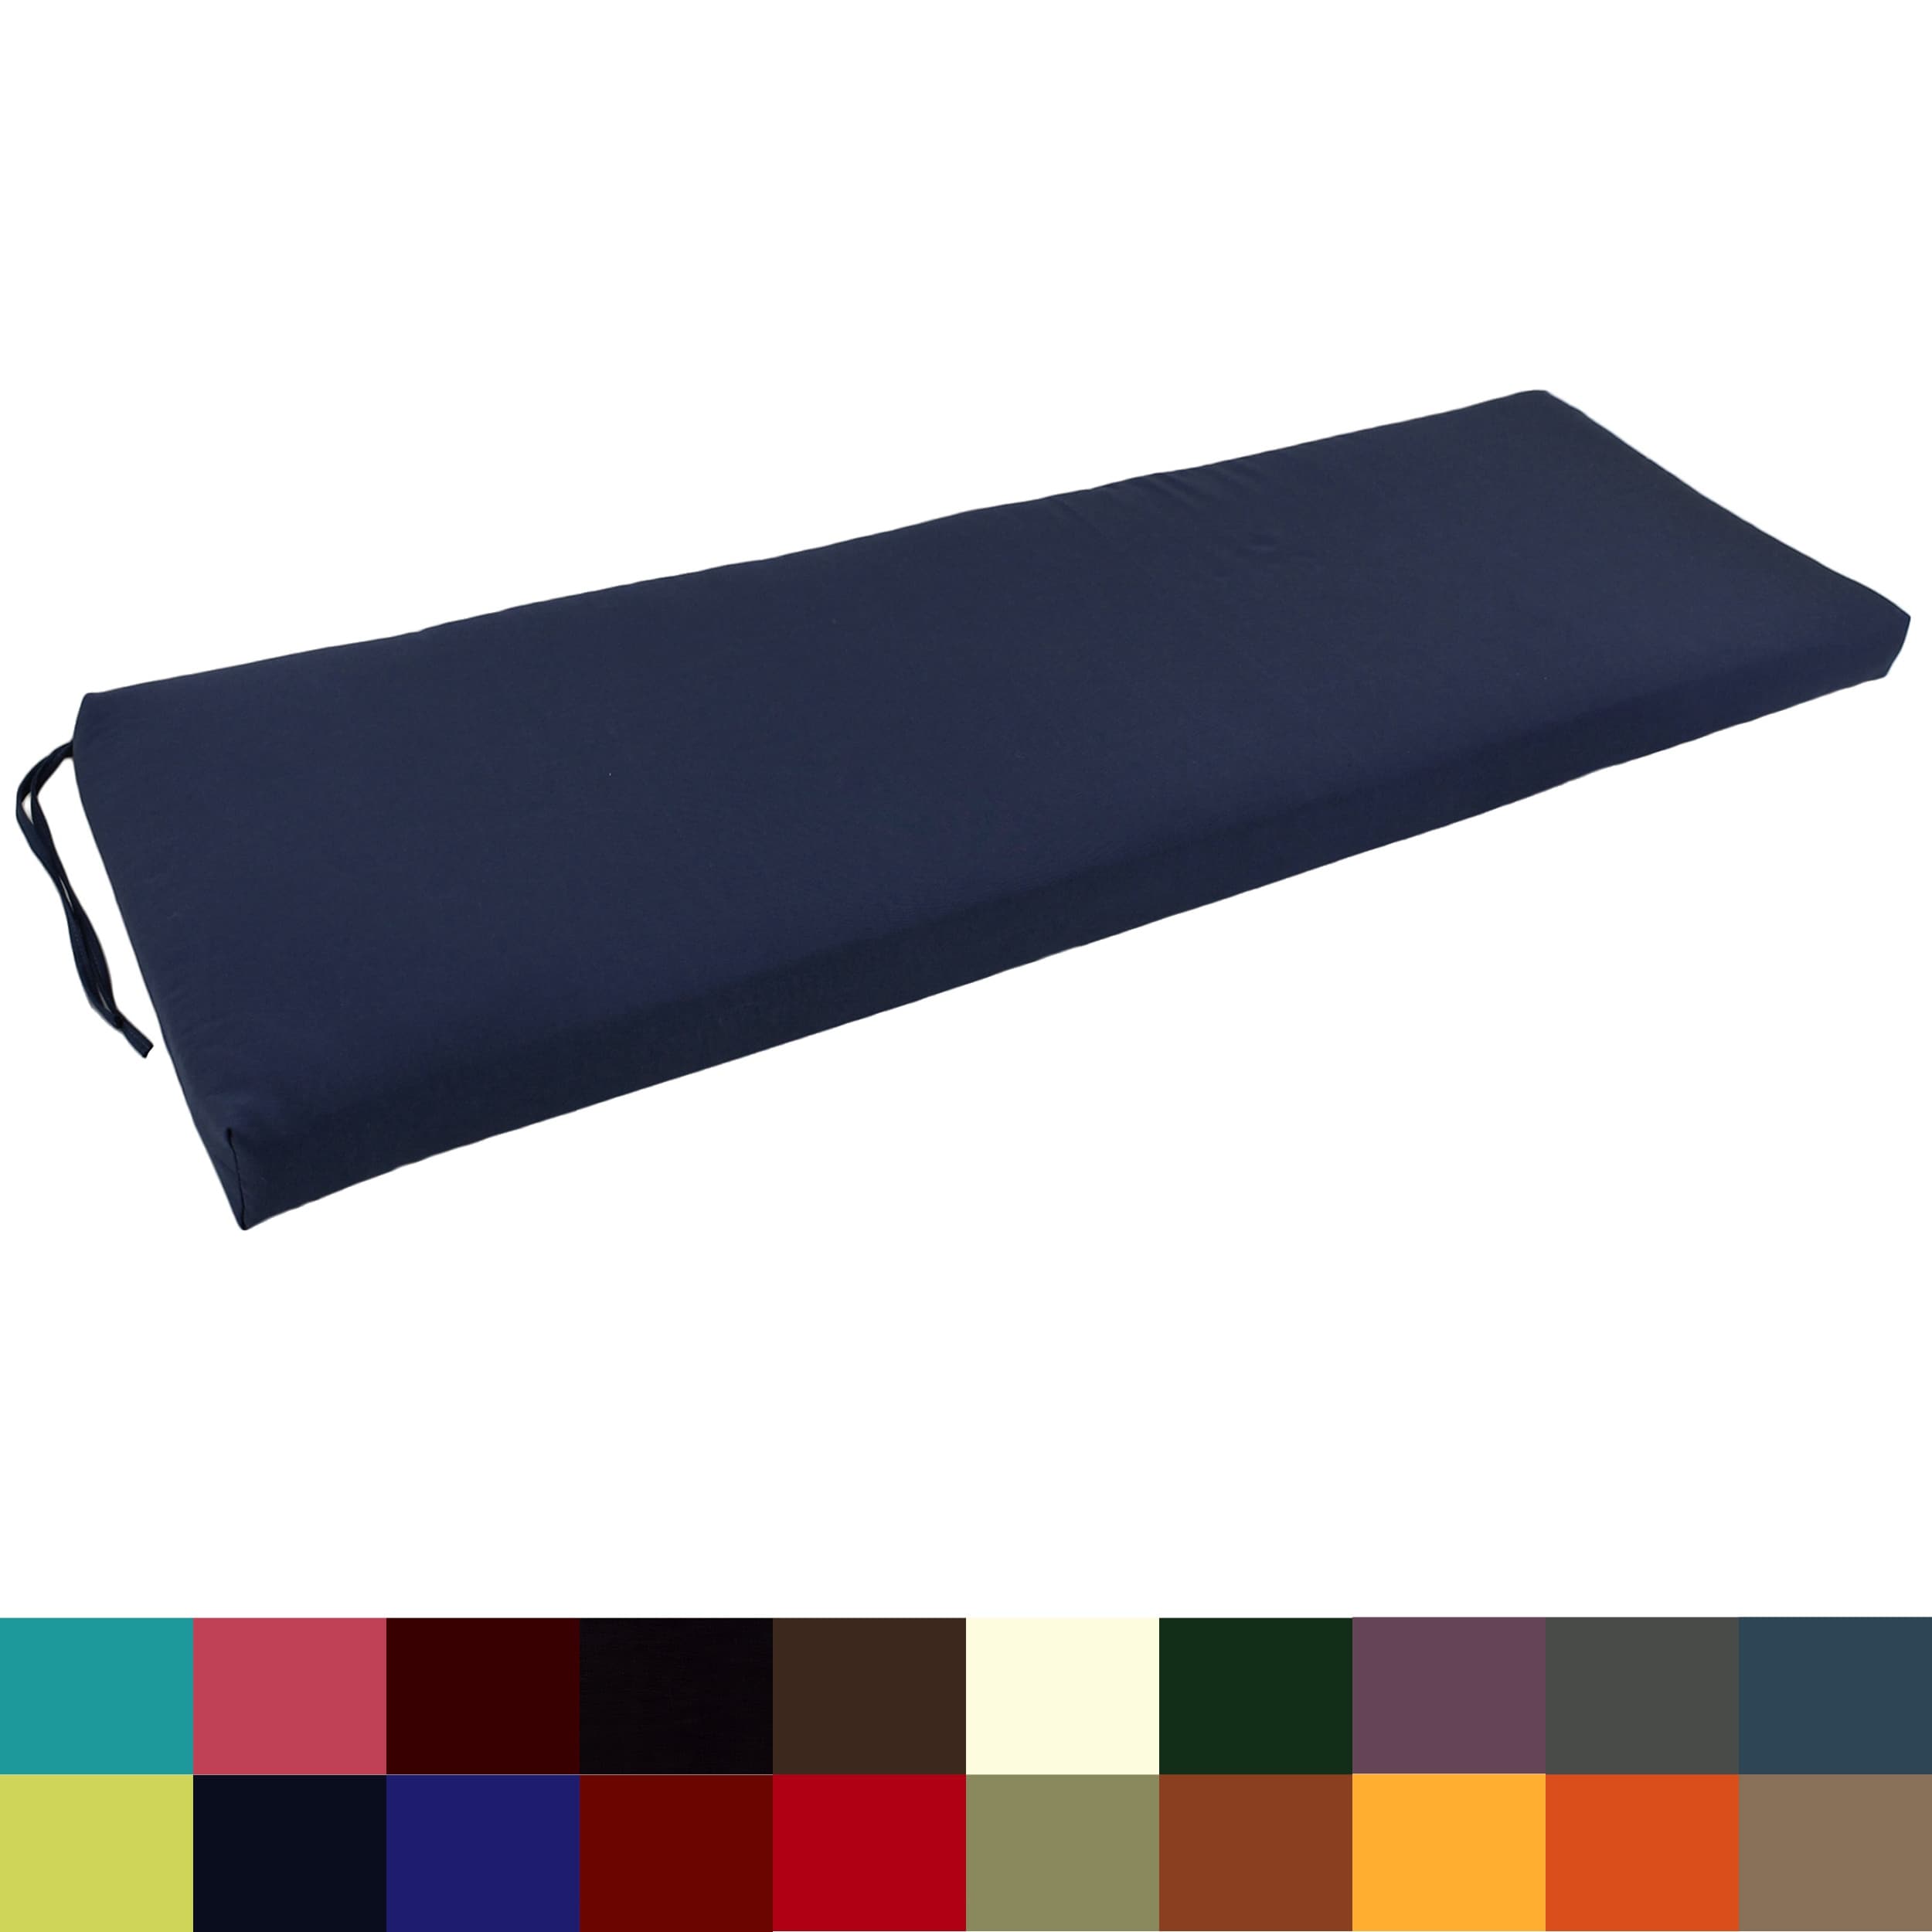 https://ak1.ostkcdn.com/images/products/is/images/direct/8fd2c4379b920e8fe57fc170329411a0a1b95236/Twill-Indoor-Bench-Cushion-%2848-%2C-51-%2C-or-54-inches-wide%29.jpg